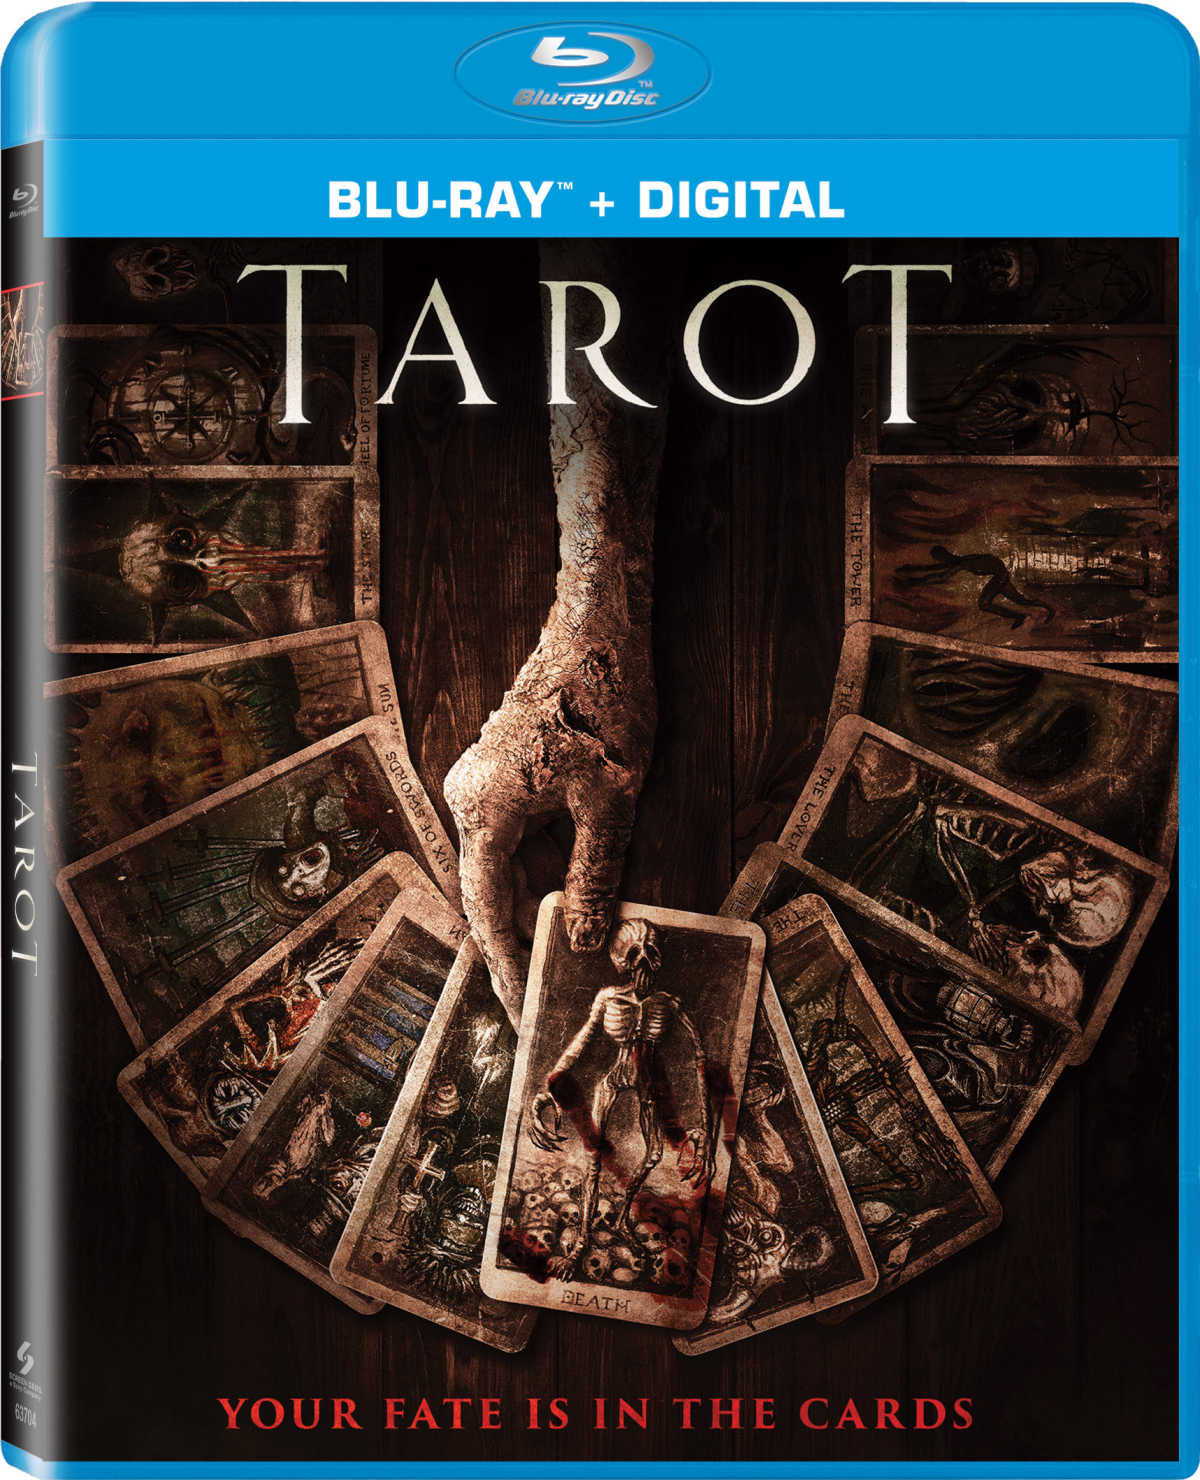 Craving scares with your squad? "Tarot" (now on Blu-ray & Digital) delivers! A reckless game with a cursed deck unleashes horror as friends face their destinies. Fun chills and jump-out-of-your-seat moments make it perfect for a fright night in.